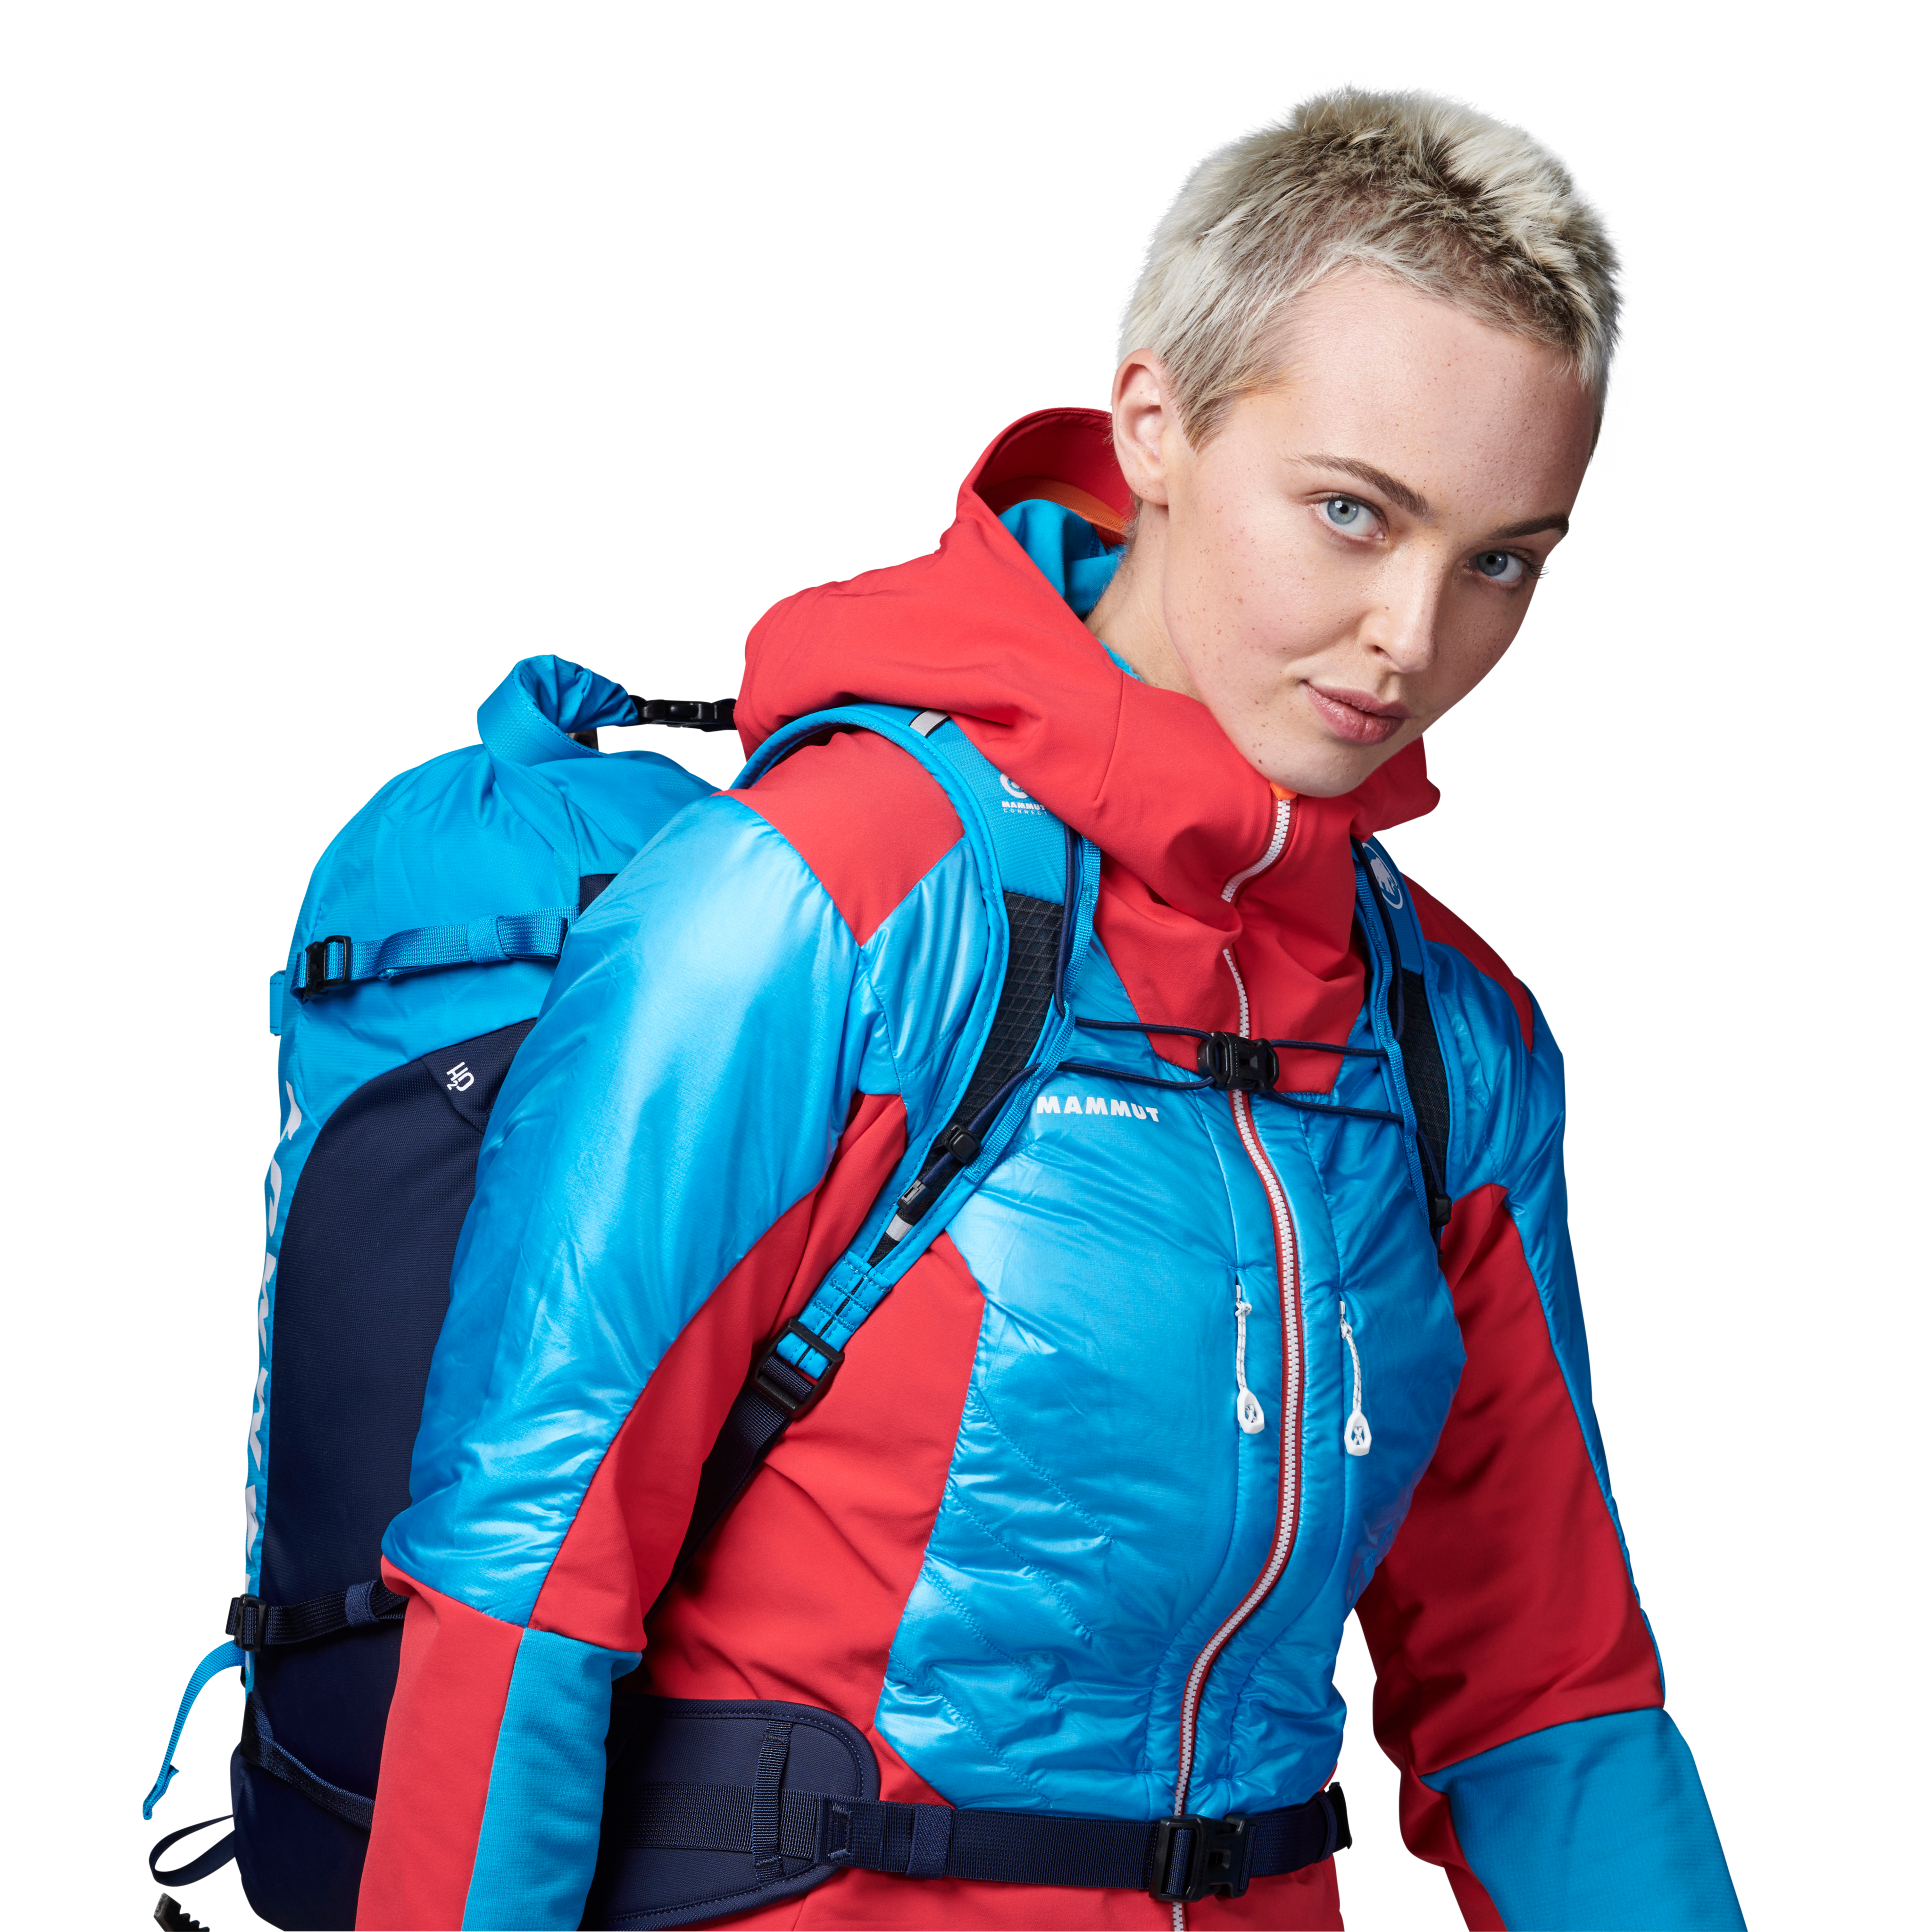 Trion Nordwand 28 Women product image